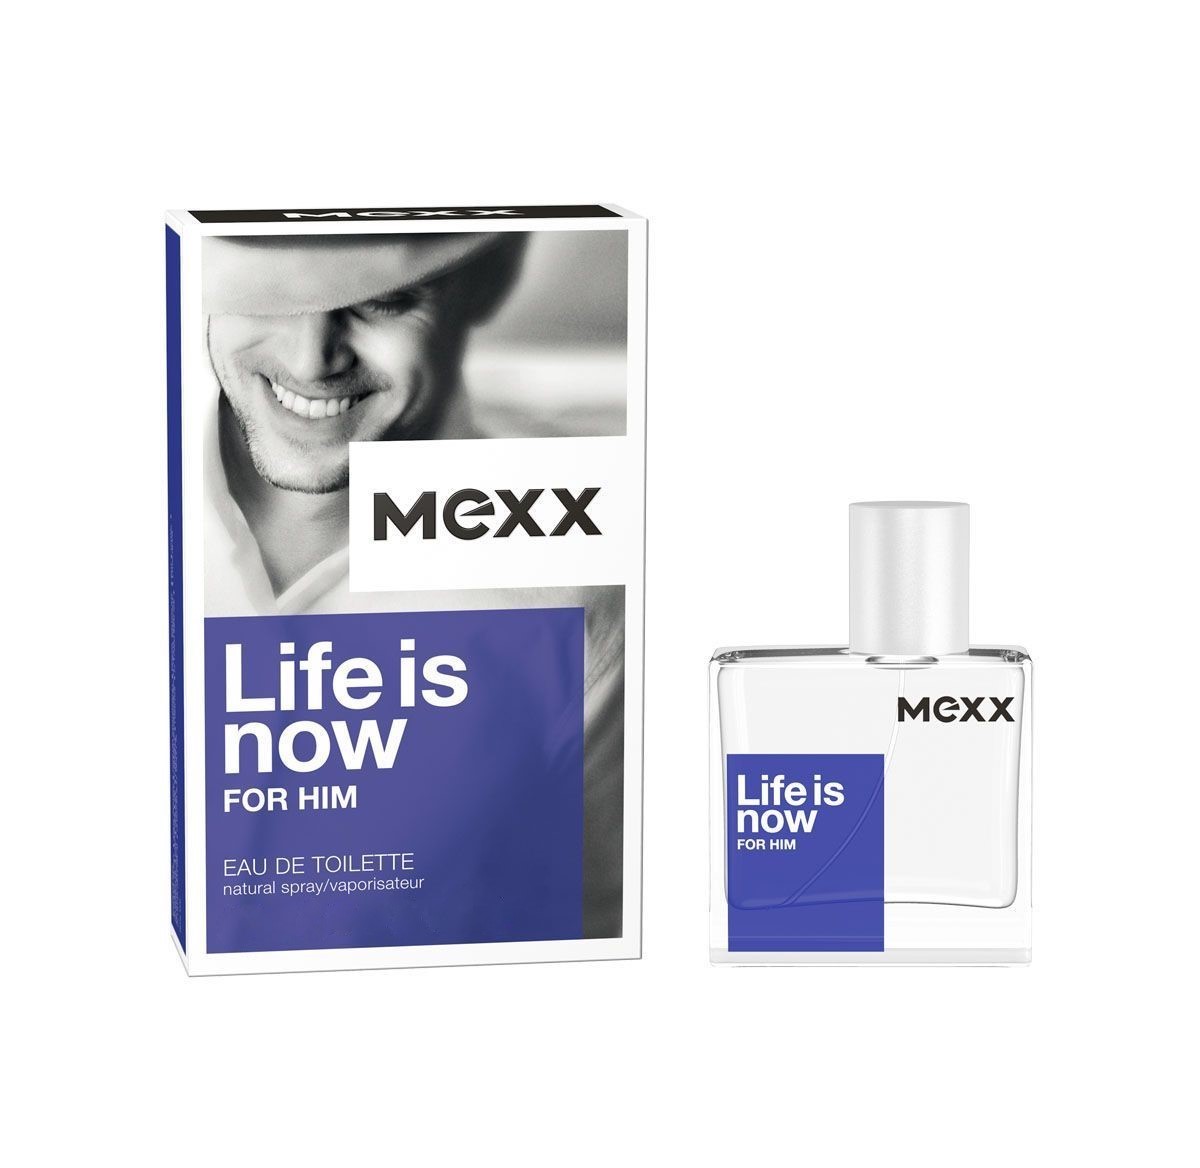 MEXX LIFE IS NOW FOR HIM